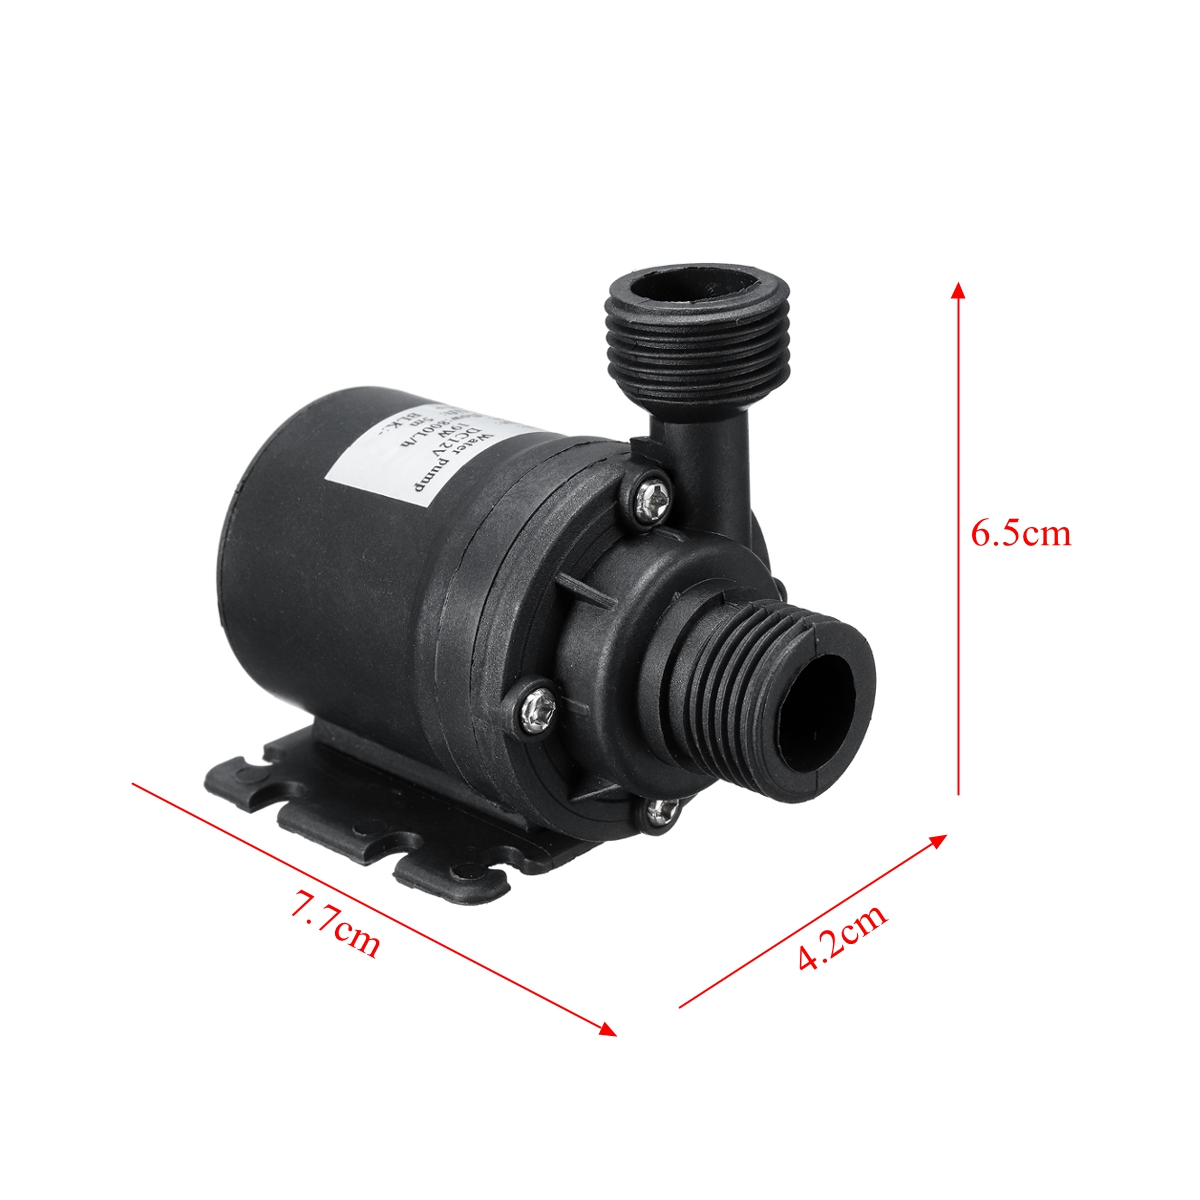 ZYW680-Mini-DC-24V-Water-Pump-Ultra-Quiet-55m-Lift-Brushless-Motor-Submersible-Water-Pump-1531436-8